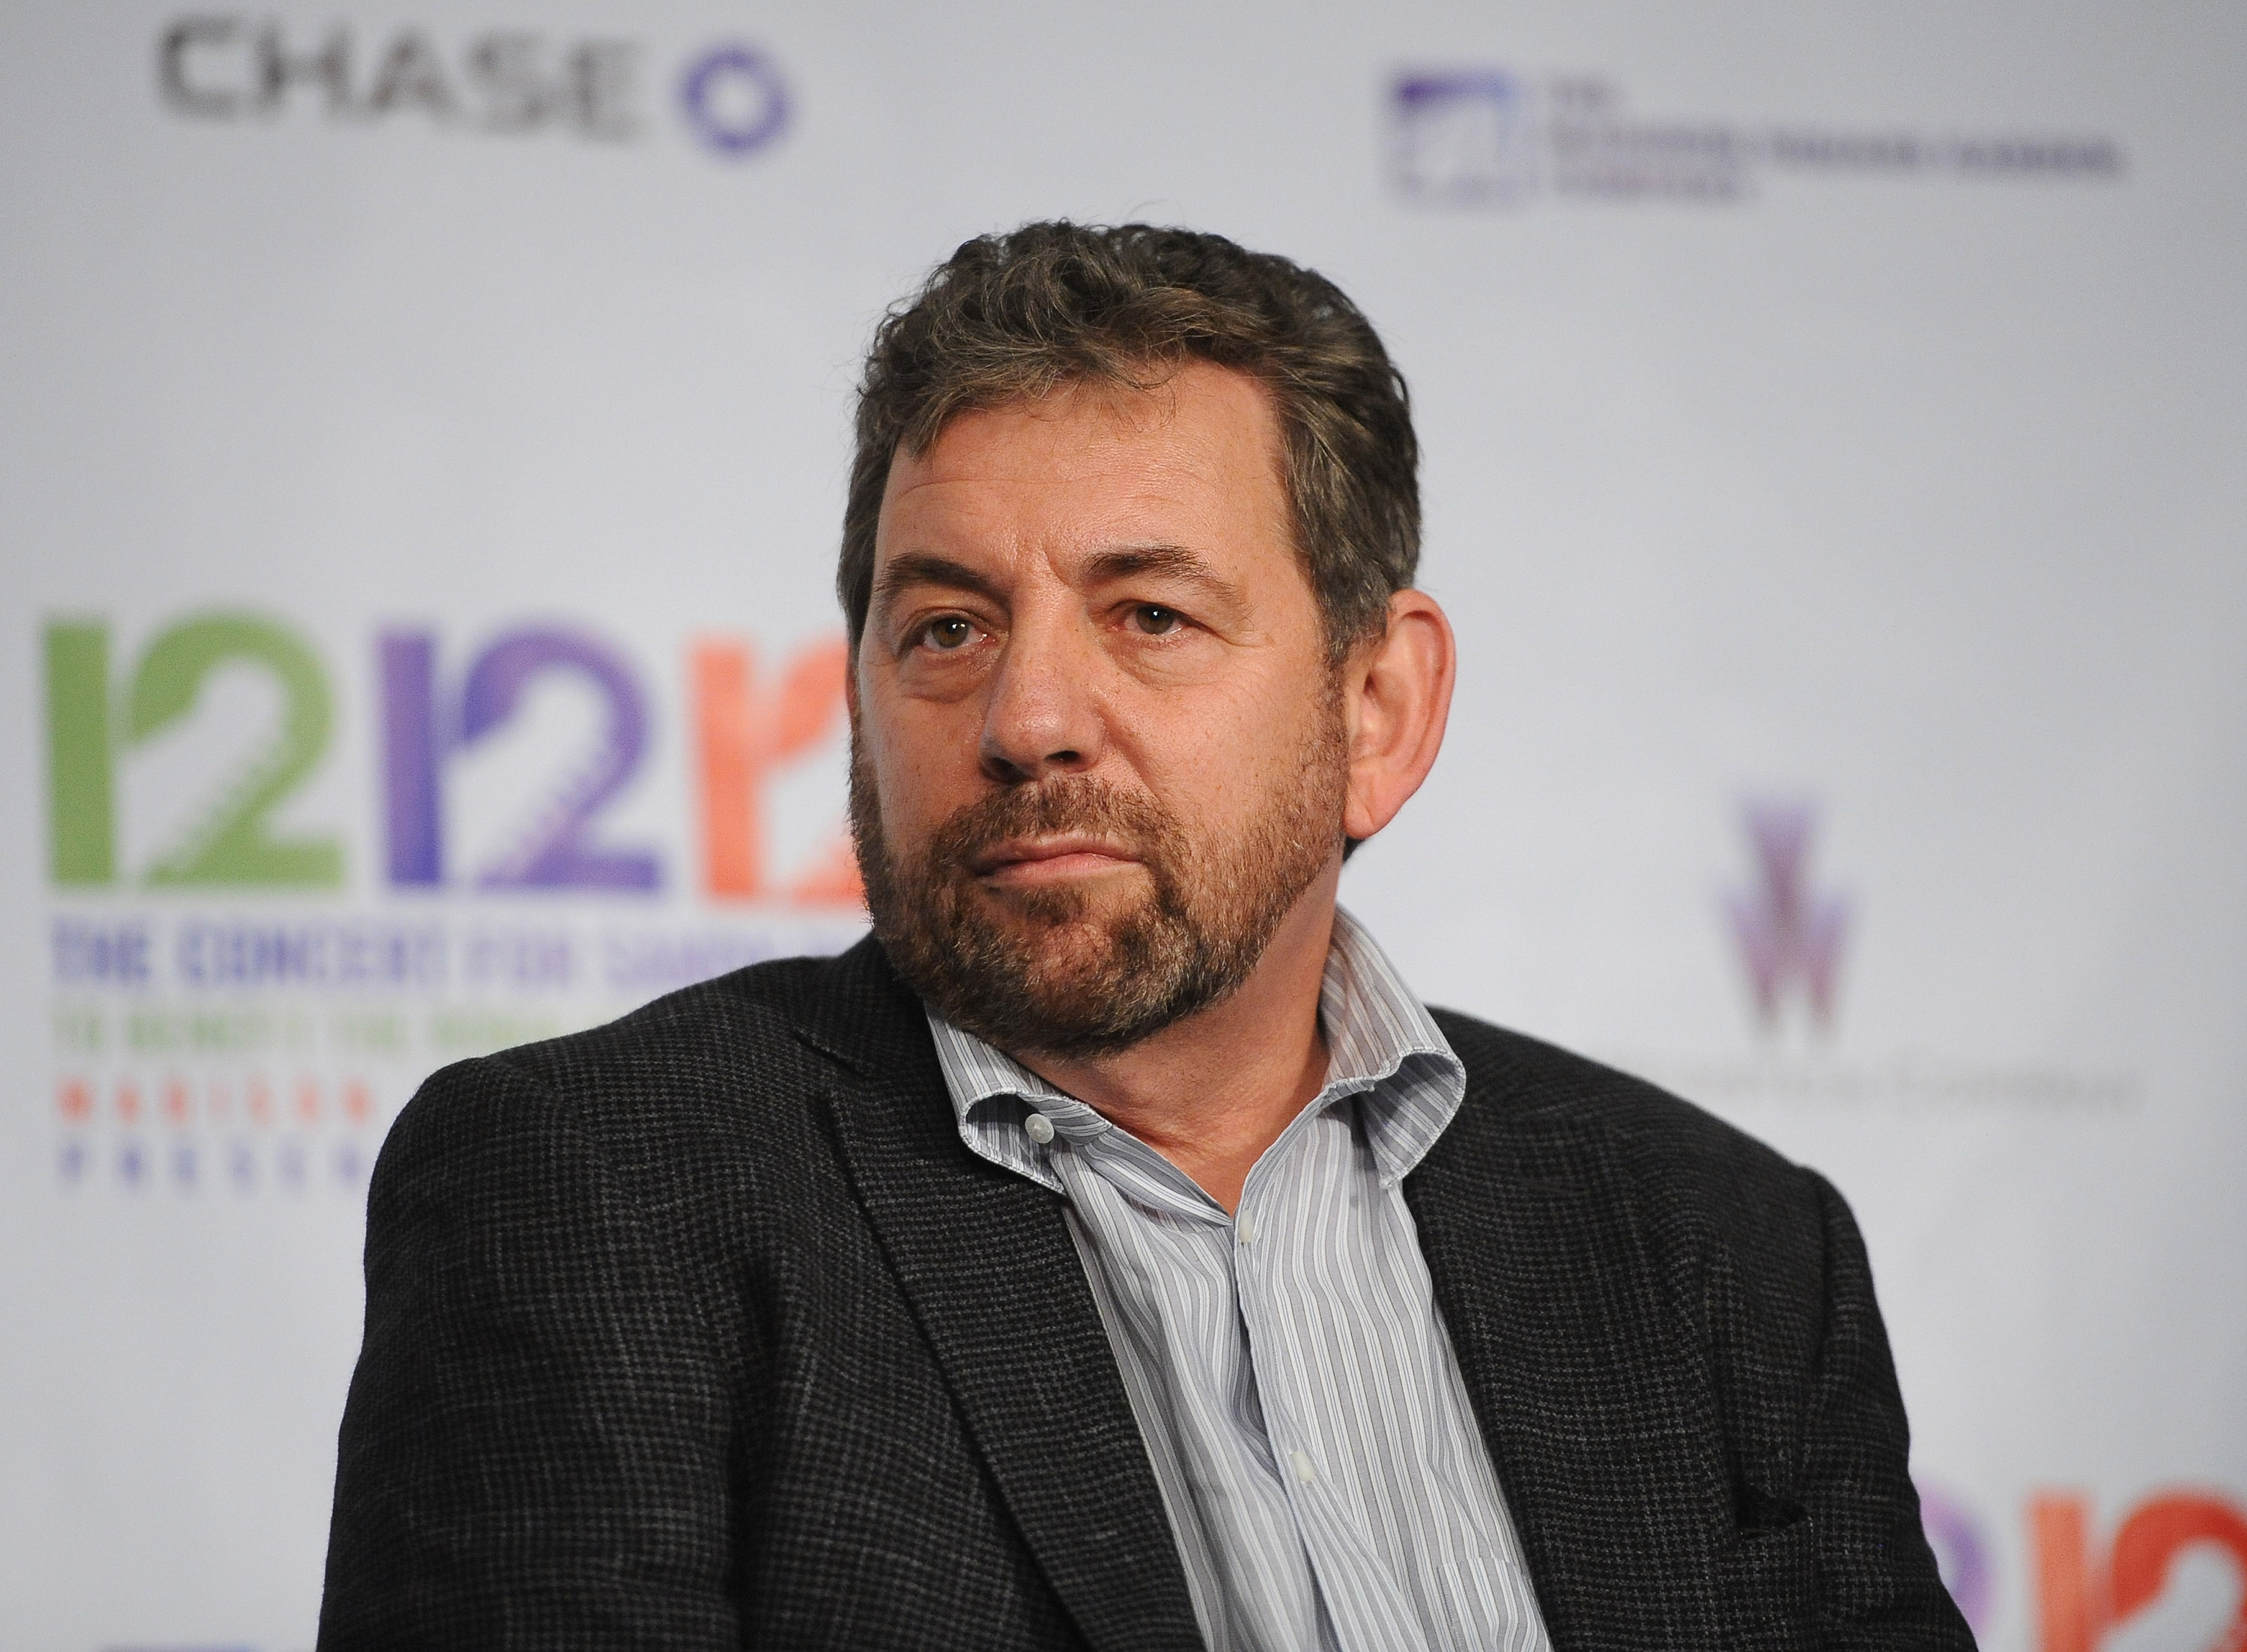 File photo of James Dolan. (Photo by Fernando Leon/Getty Images)